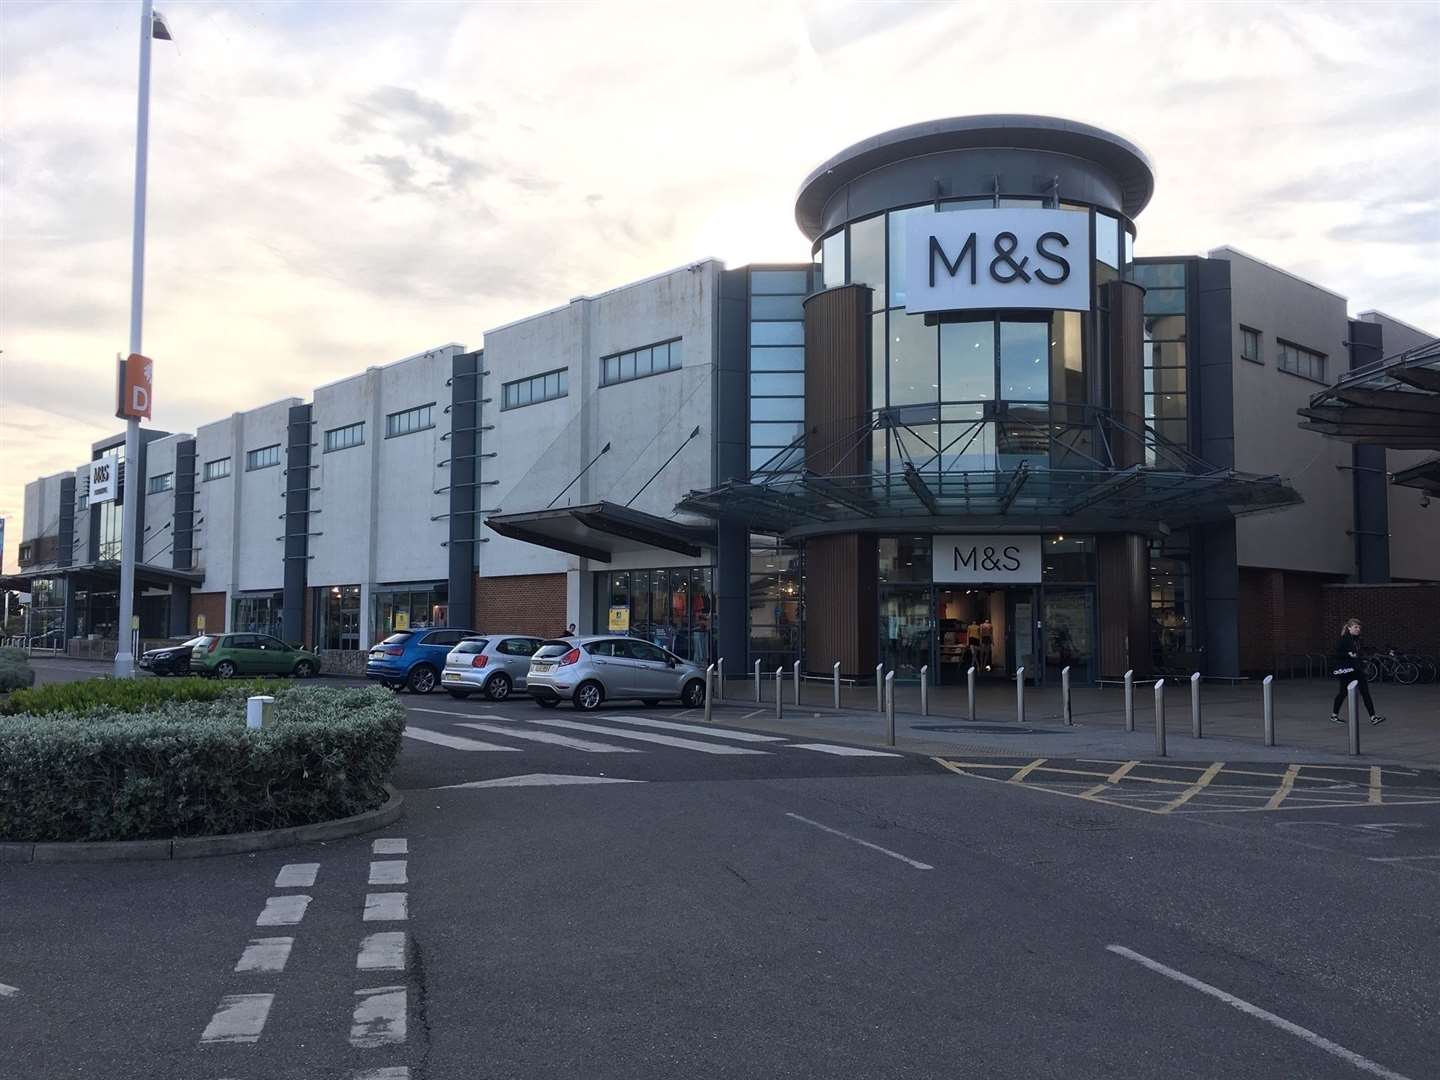 Westwood Cross shopping centre suffered flooding after last night's heavy rainfall.